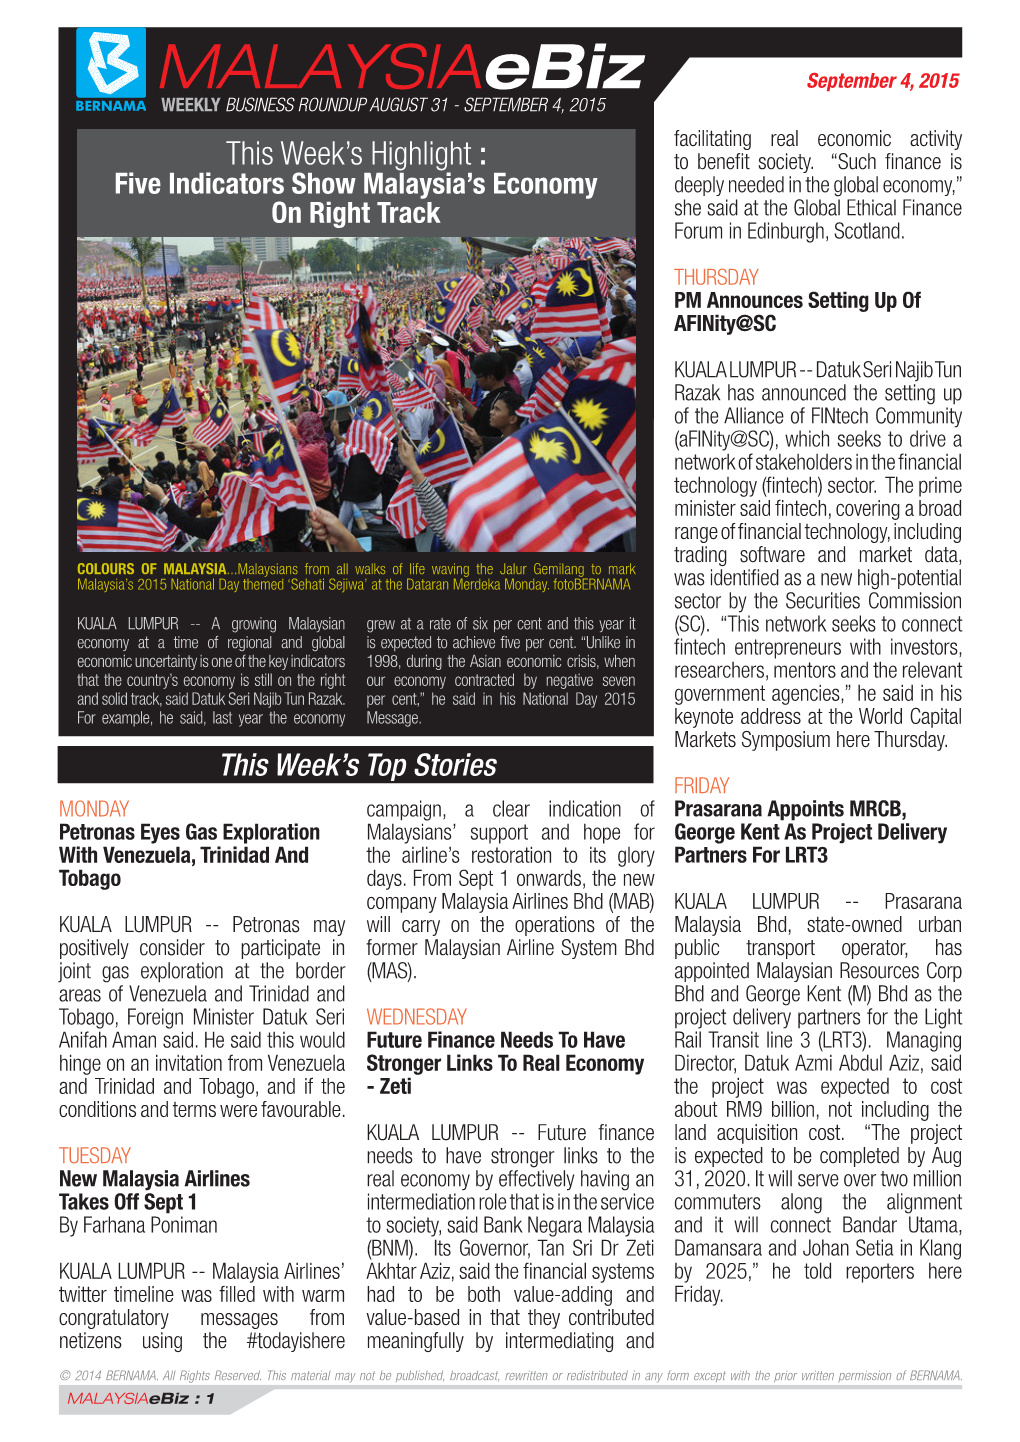 Malaysiaebiz September 4, 2015 WEEKLY BUSINESS ROUNDUP AUGUST 31 - SEPTEMBER 4, 2015 Facilitating Real Economic Activity This Week’S Highlight : to Benefit Society